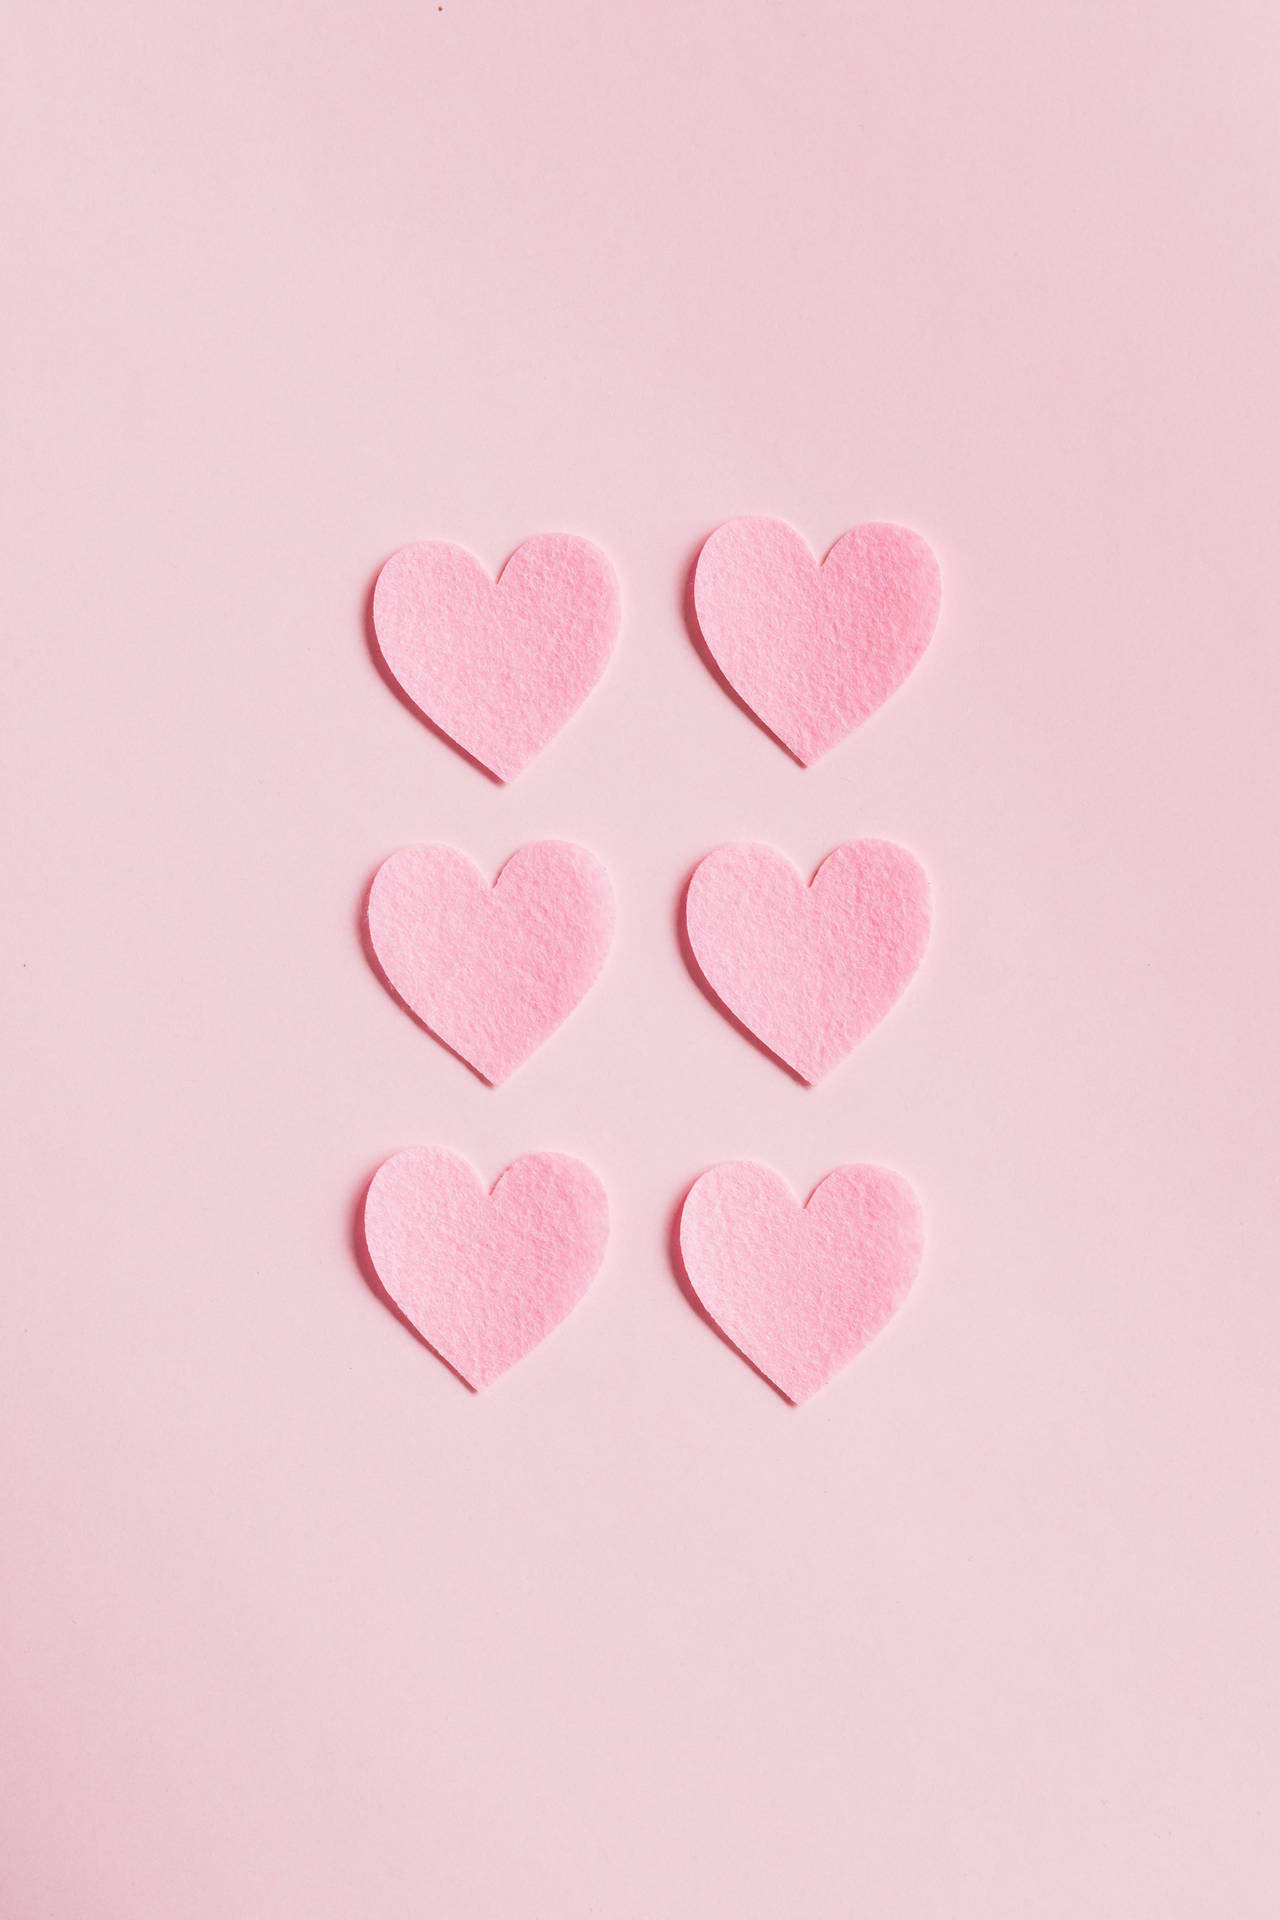 Hearts On Pink Background Wallpaper